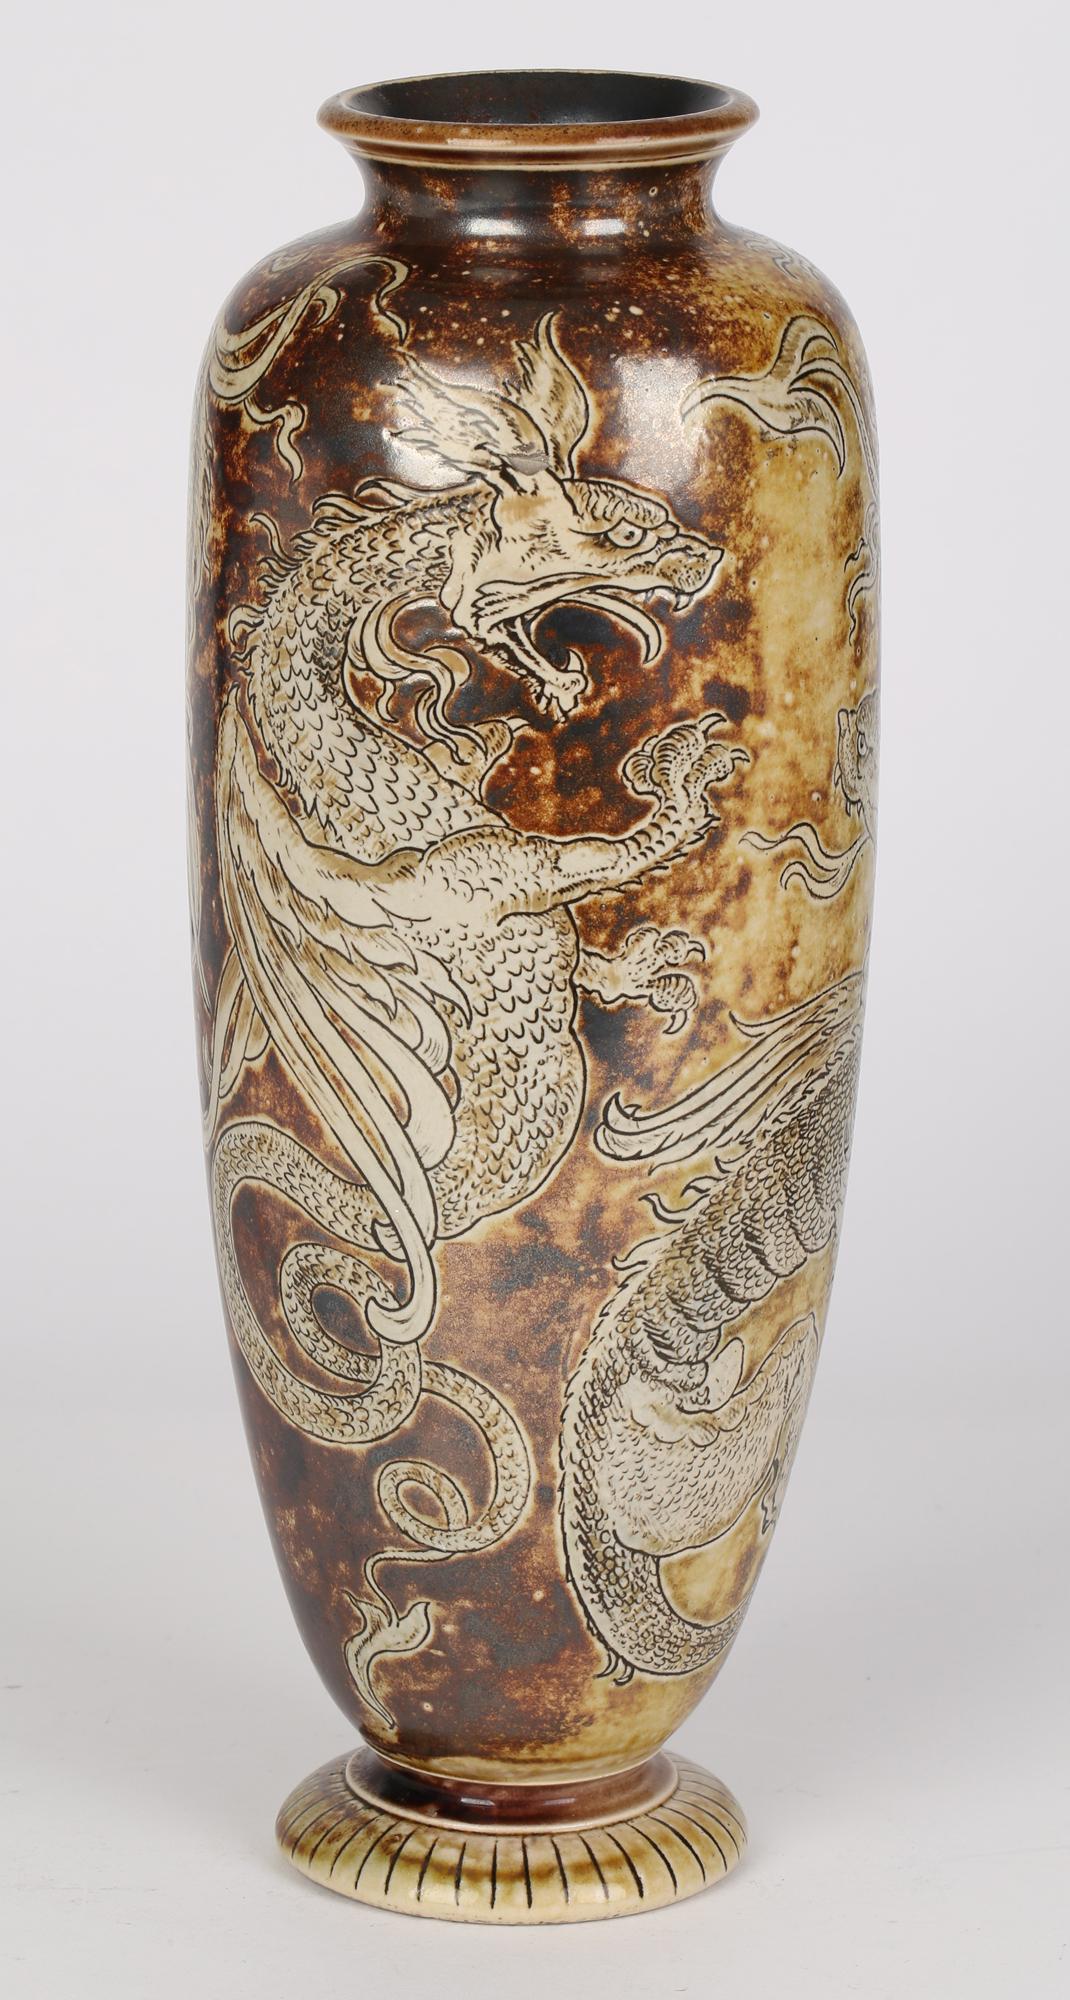 Robert Wallace Martin for Martin Brothers Stoneware Duelling Dragons Vase 1896 For Sale 9